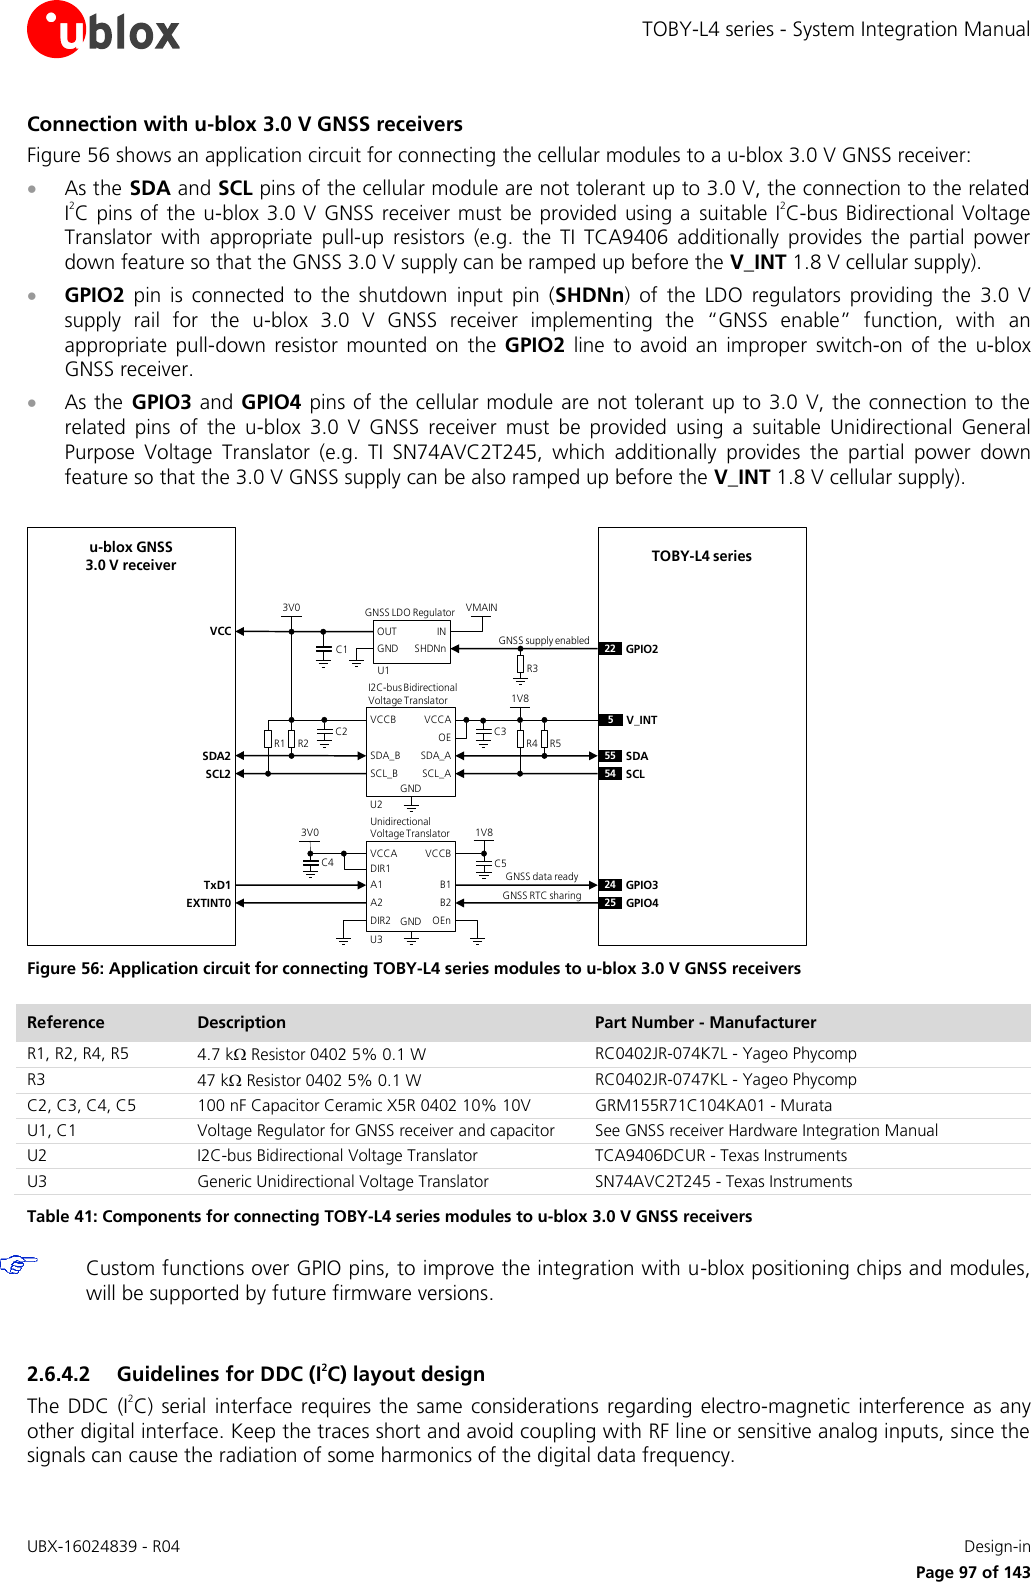 TOBY-L4 series - System Integration Manual UBX-16024839 - R04    Design-in     Page 97 of 143 Connection with u-blox 3.0 V GNSS receivers Figure 56 shows an application circuit for connecting the cellular modules to a u-blox 3.0 V GNSS receiver:  As the SDA and SCL pins of the cellular module are not tolerant up to 3.0 V, the connection to the related I2C pins of the u-blox 3.0 V GNSS receiver must be provided using a  suitable  I2C-bus Bidirectional Voltage Translator  with  appropriate  pull-up  resistors  (e.g.  the  TI  TCA9406  additionally  provides  the  partial  power down feature so that the GNSS 3.0 V supply can be ramped up before the V_INT 1.8 V cellular supply).  GPIO2  pin  is  connected  to  the  shutdown  input  pin  (SHDNn)  of  the  LDO  regulators  providing  the  3.0  V supply  rail  for  the  u-blox  3.0  V  GNSS  receiver  implementing  the  “GNSS  enable”  function,  with  an appropriate  pull-down resistor  mounted on  the GPIO2  line  to avoid an improper  switch-on  of the u-blox GNSS receiver.  As the  GPIO3 and GPIO4  pins of the cellular module are not tolerant up to 3.0 V, the connection to the related  pins  of  the  u-blox  3.0  V  GNSS  receiver  must  be  provided  using  a  suitable  Unidirectional  General Purpose  Voltage  Translator  (e.g.  TI  SN74AVC2T245,  which  additionally  provides  the  partial  power  down feature so that the 3.0 V GNSS supply can be also ramped up before the V_INT 1.8 V cellular supply).  u-blox GNSS 3.0 V receiver24 GPIO31V8B1 A1GNDU3B2A2VCCBVCCAUnidirectionalVoltage TranslatorC4 C53V0TxD1R1INOUTGNSS LDO RegulatorSHDNnR2VMAIN3V0U122 GPIO255 SDA54 SCLR4 R51V8SDA_A SDA_BGNDU2SCL_ASCL_BVCCAVCCBI2C-bus Bidirectional Voltage Translator5V_INTC1C2 C3R3SDA2SCL2VCCDIR1DIR2 OEnOEGNSS data readyGNSS supply enabledGNDTOBY-L4 seriesEXTINT0 GPIO425GNSS RTC sharing Figure 56: Application circuit for connecting TOBY-L4 series modules to u-blox 3.0 V GNSS receivers Reference Description Part Number - Manufacturer R1, R2, R4, R5 4.7 k Resistor 0402 5% 0.1 W  RC0402JR-074K7L - Yageo Phycomp R3 47 k Resistor 0402 5% 0.1 W  RC0402JR-0747KL - Yageo Phycomp C2, C3, C4, C5 100 nF Capacitor Ceramic X5R 0402 10% 10V GRM155R71C104KA01 - Murata U1, C1 Voltage Regulator for GNSS receiver and capacitor  See GNSS receiver Hardware Integration Manual U2 I2C-bus Bidirectional Voltage Translator TCA9406DCUR - Texas Instruments U3 Generic Unidirectional Voltage Translator SN74AVC2T245 - Texas Instruments Table 41: Components for connecting TOBY-L4 series modules to u-blox 3.0 V GNSS receivers  Custom functions over GPIO pins, to improve the integration with u-blox positioning chips and modules, will be supported by future firmware versions.  2.6.4.2 Guidelines for DDC (I2C) layout design The  DDC (I2C)  serial  interface  requires the  same  considerations  regarding electro-magnetic  interference  as  any other digital interface. Keep the traces short and avoid coupling with RF line or sensitive analog inputs, since the signals can cause the radiation of some harmonics of the digital data frequency. 